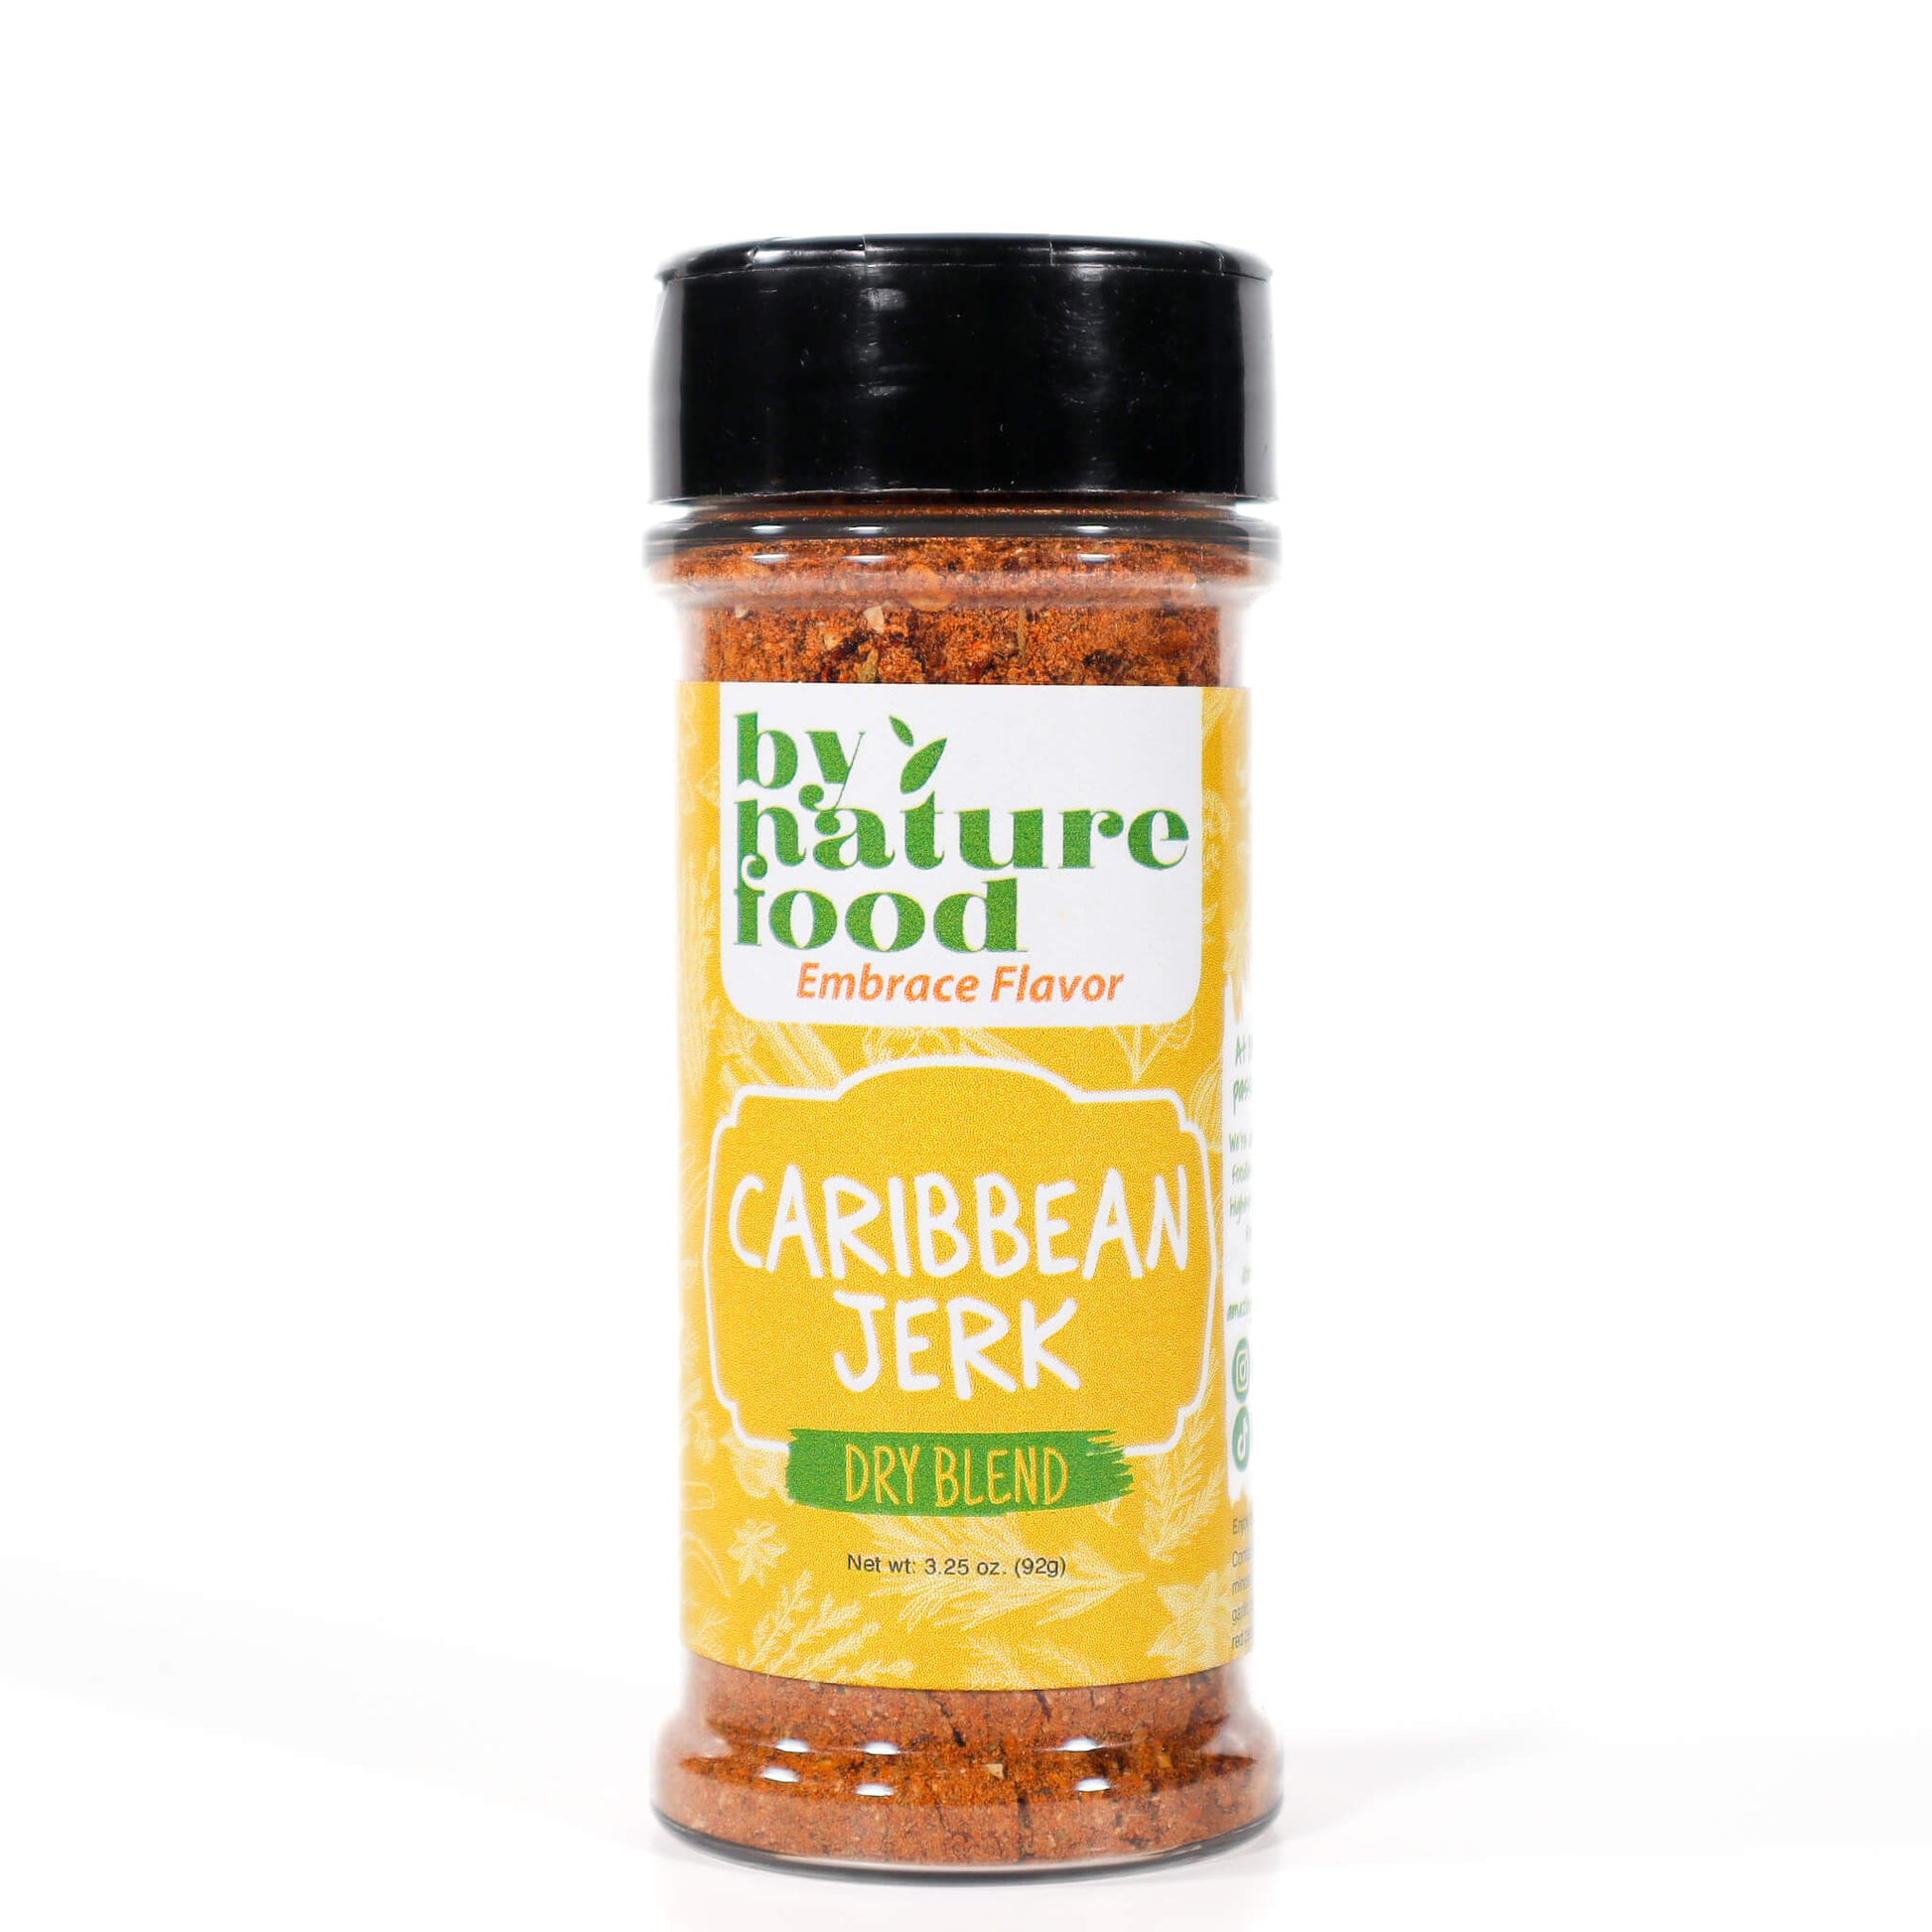 Upright product photo of Caribbean Jerk Seasoning container from By Nature Food